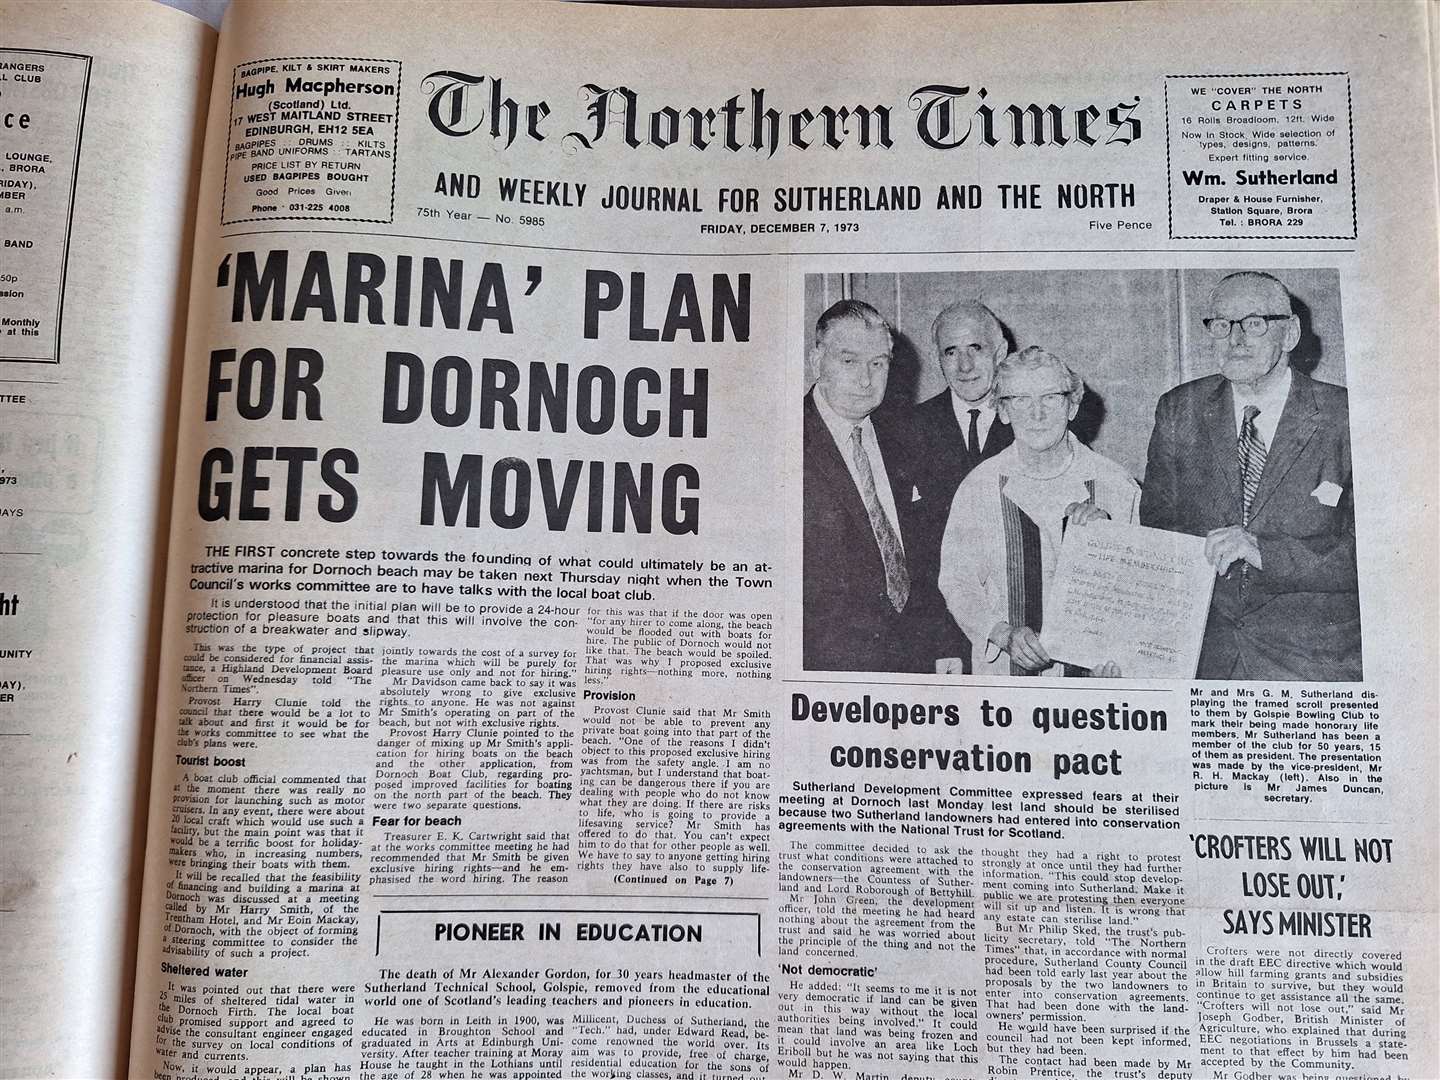 The edition of December 7, 1973.